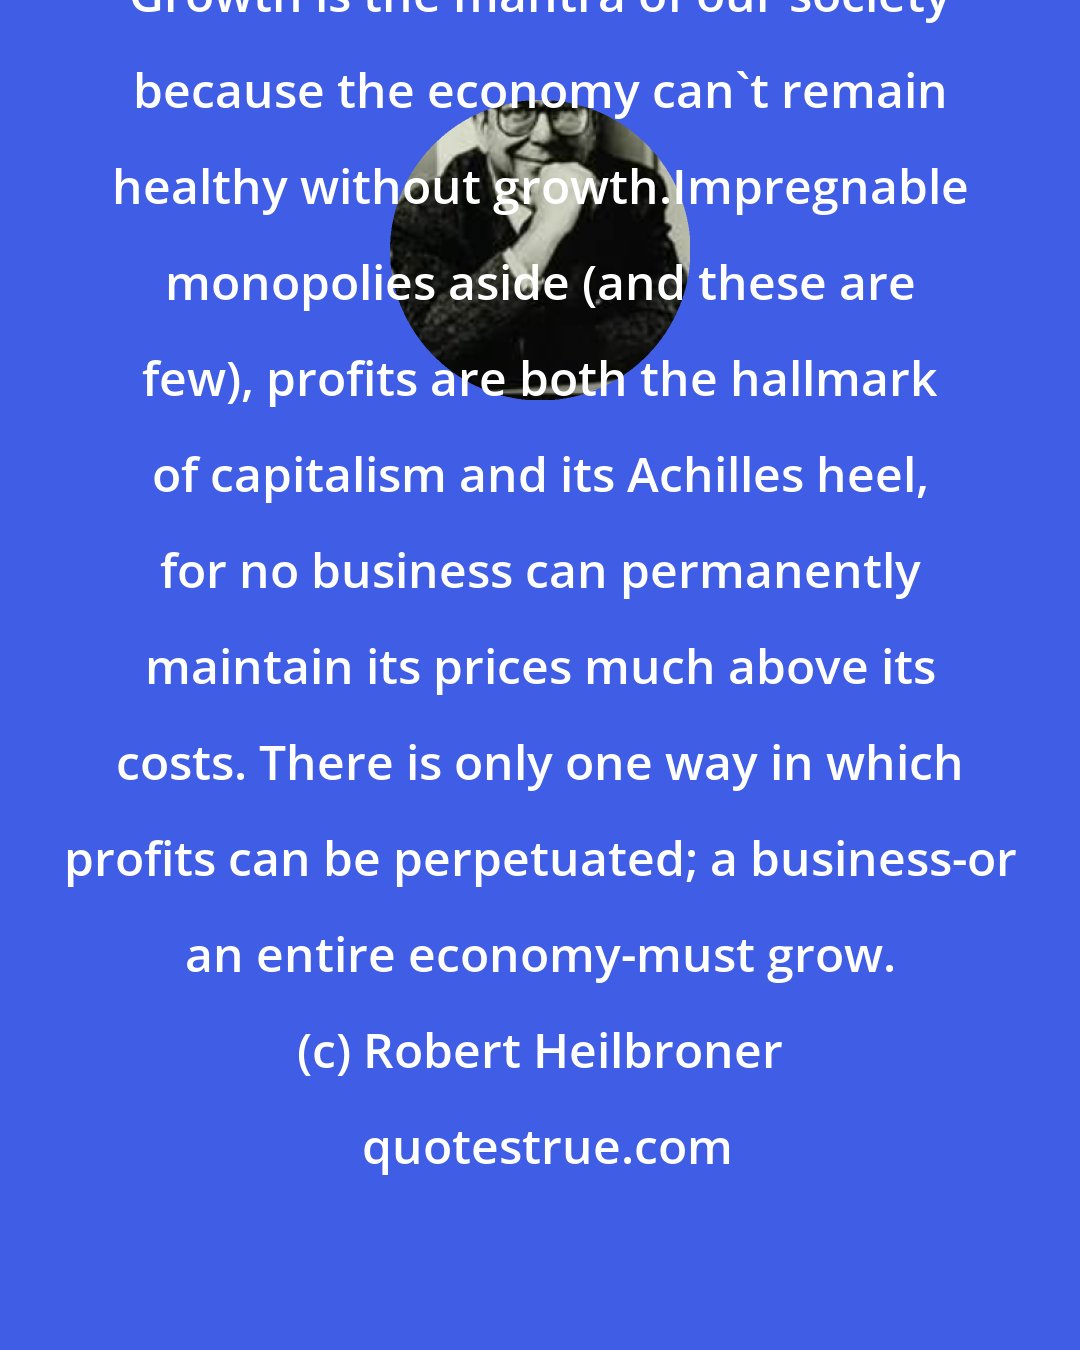 Robert Heilbroner: Growth is the mantra of our society because the economy can't remain healthy without growth.Impregnable monopolies aside (and these are few), profits are both the hallmark of capitalism and its Achilles heel, for no business can permanently maintain its prices much above its costs. There is only one way in which profits can be perpetuated; a business-or an entire economy-must grow.